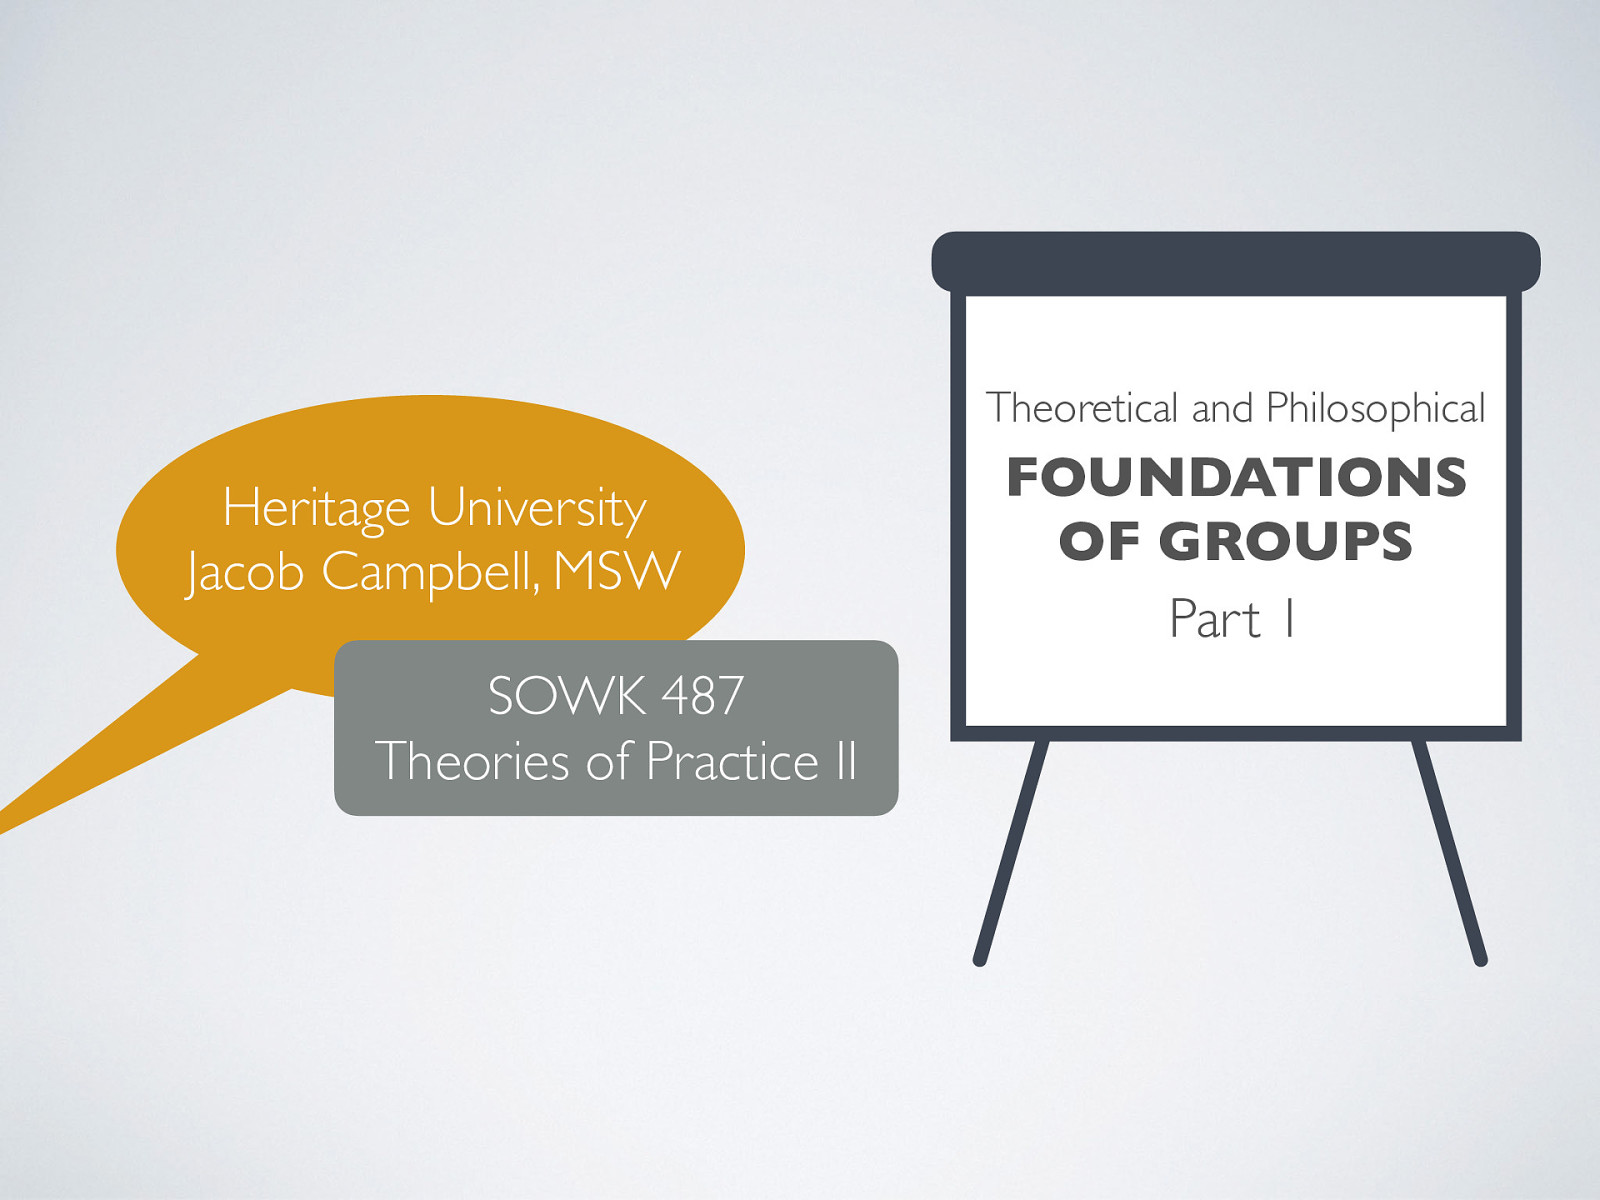 Week 02 - Theoretical and Philosophical Foundations to Groups part I